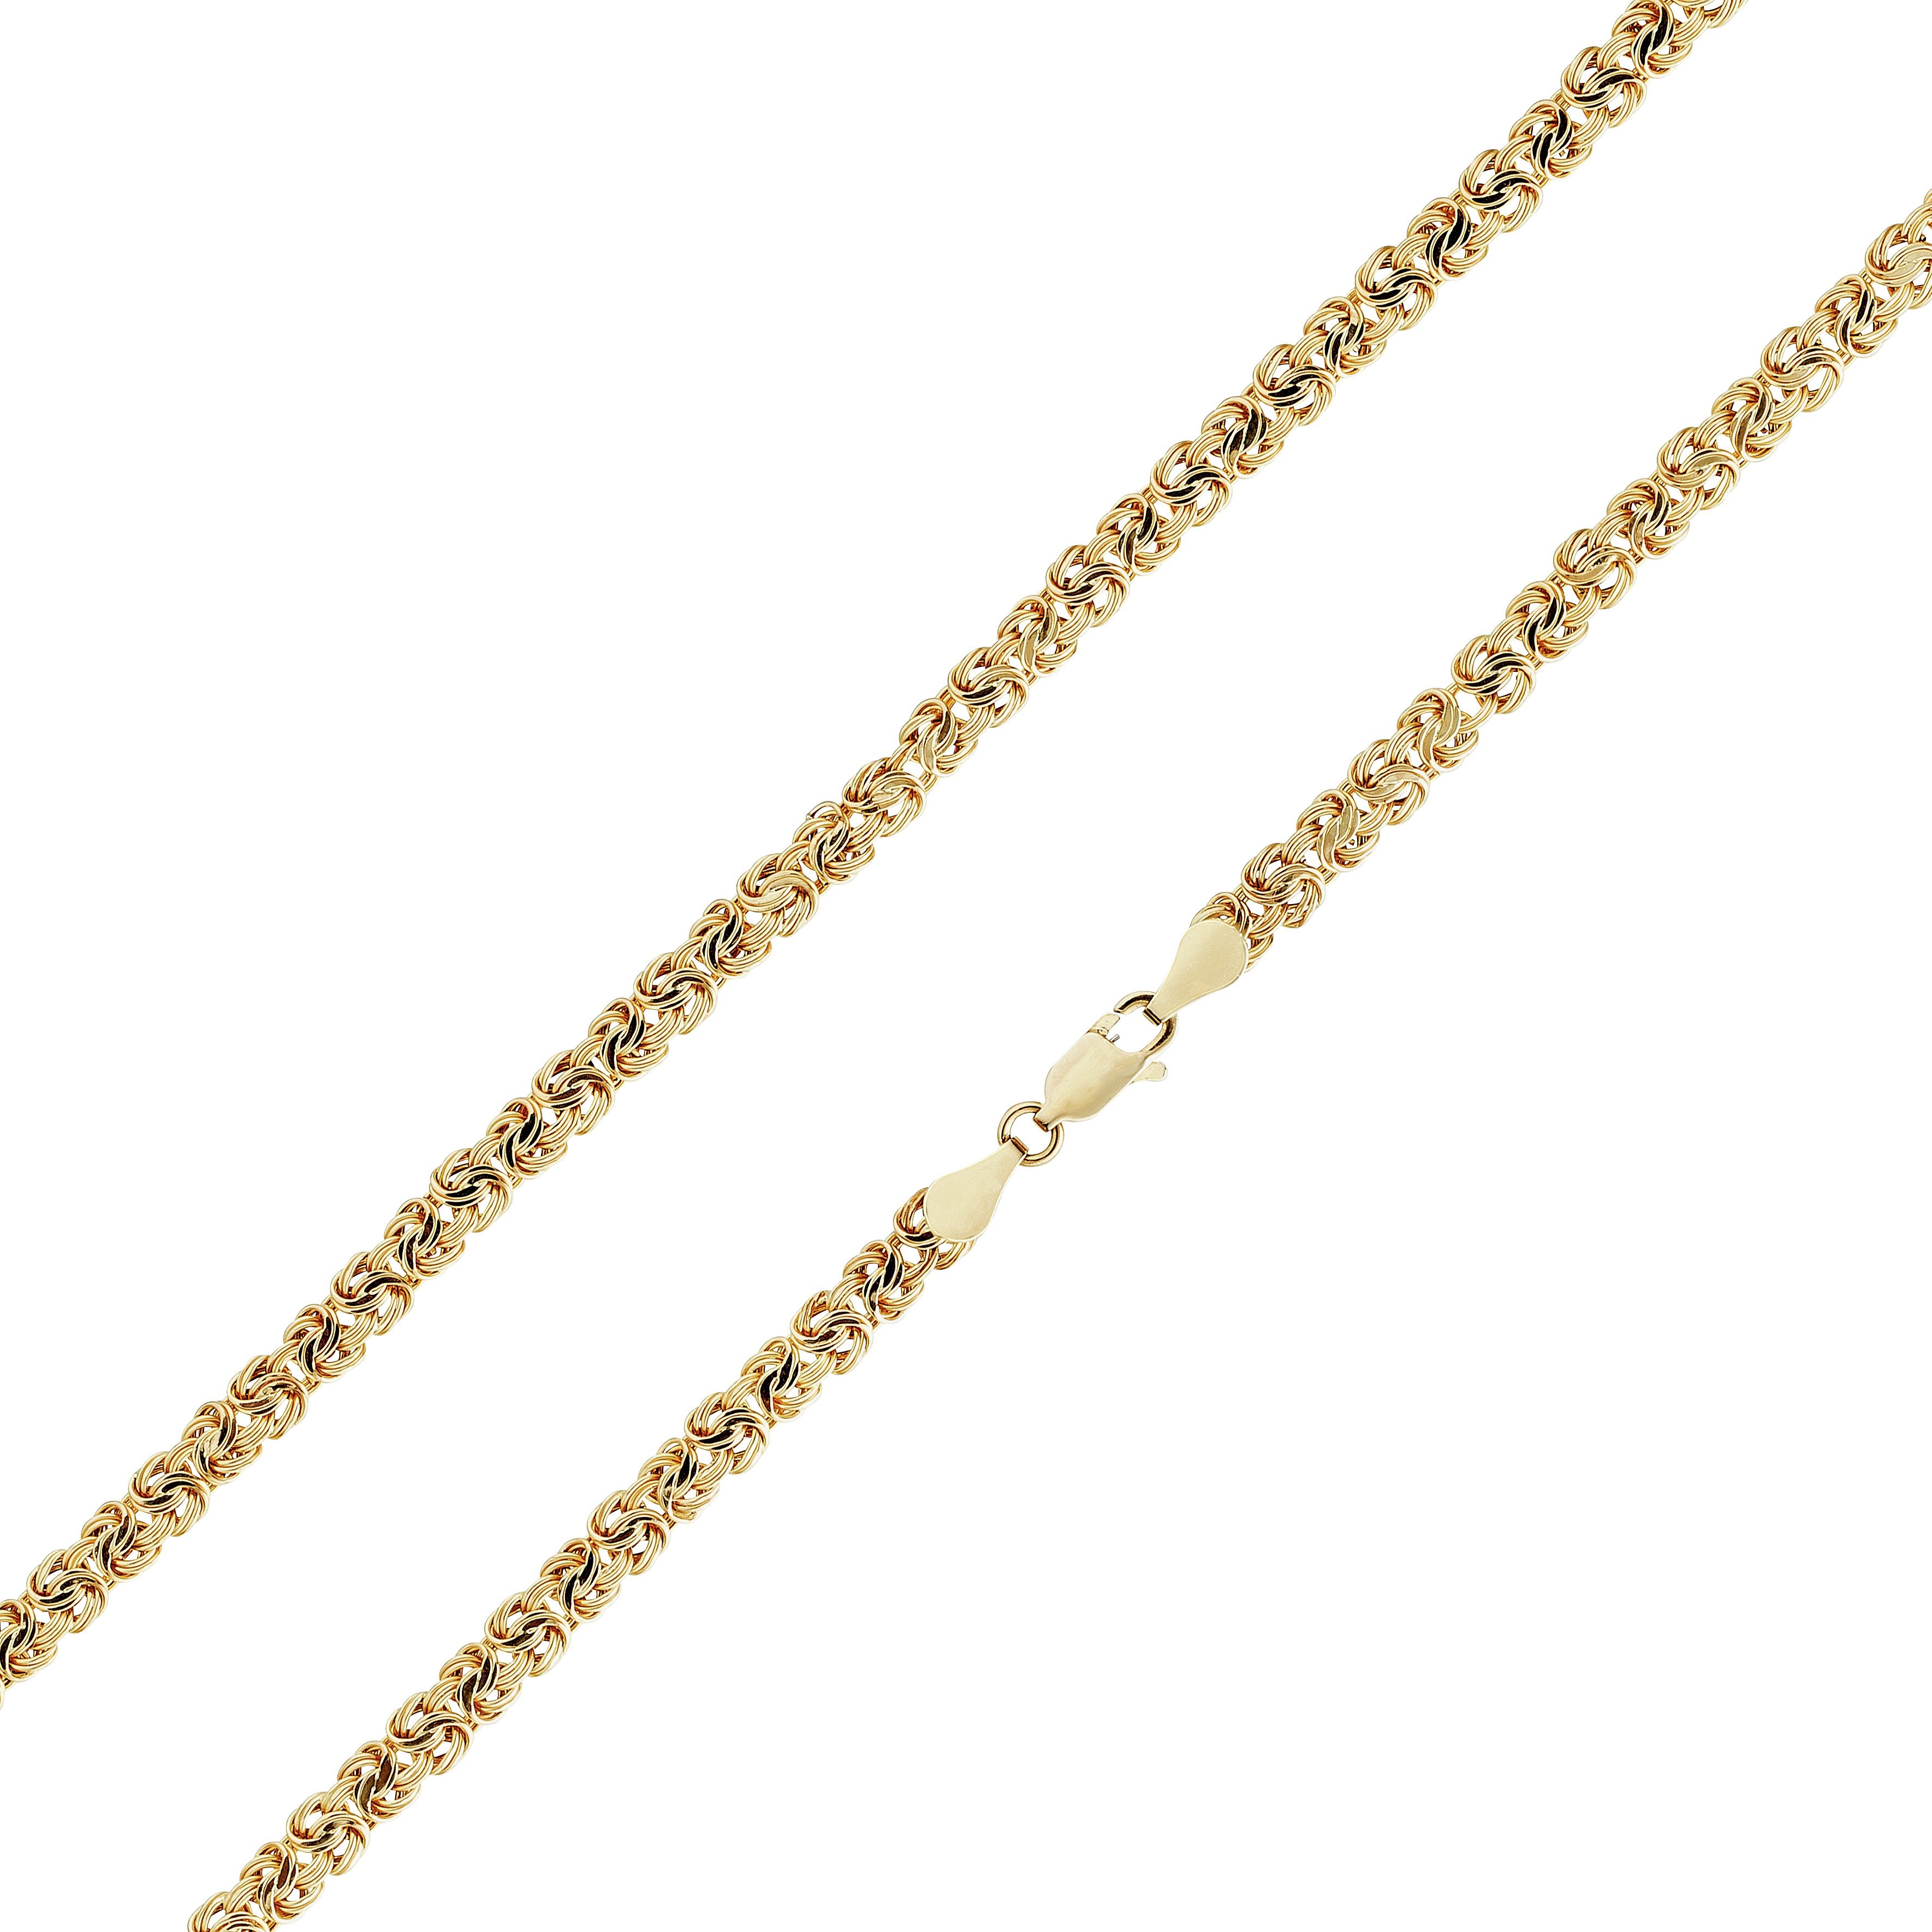 Revere 9ct Gold Fancy Chain 18in Necklace Review